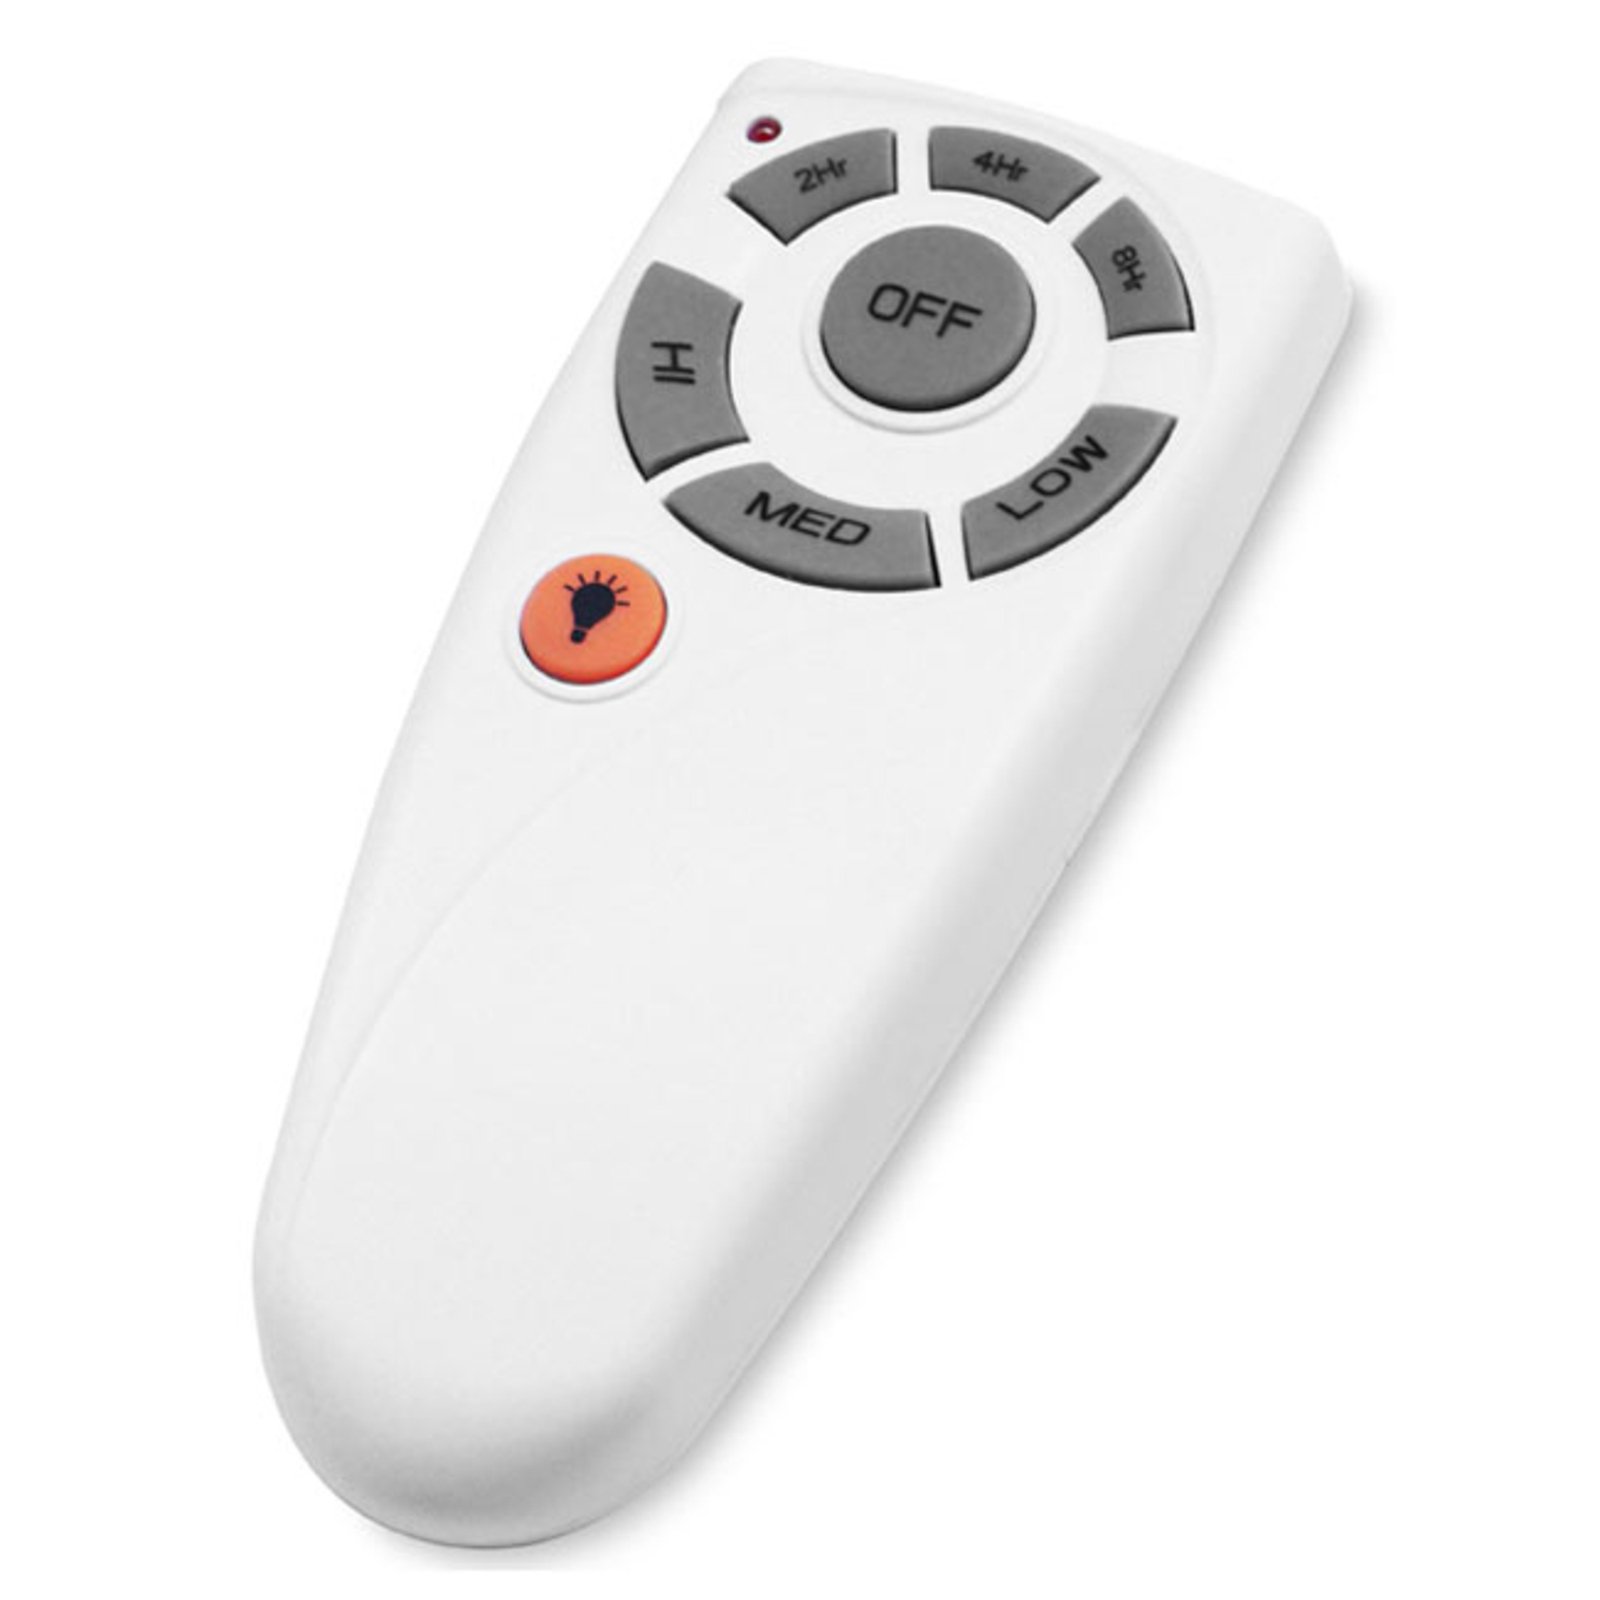 Remote control for ceiling fan